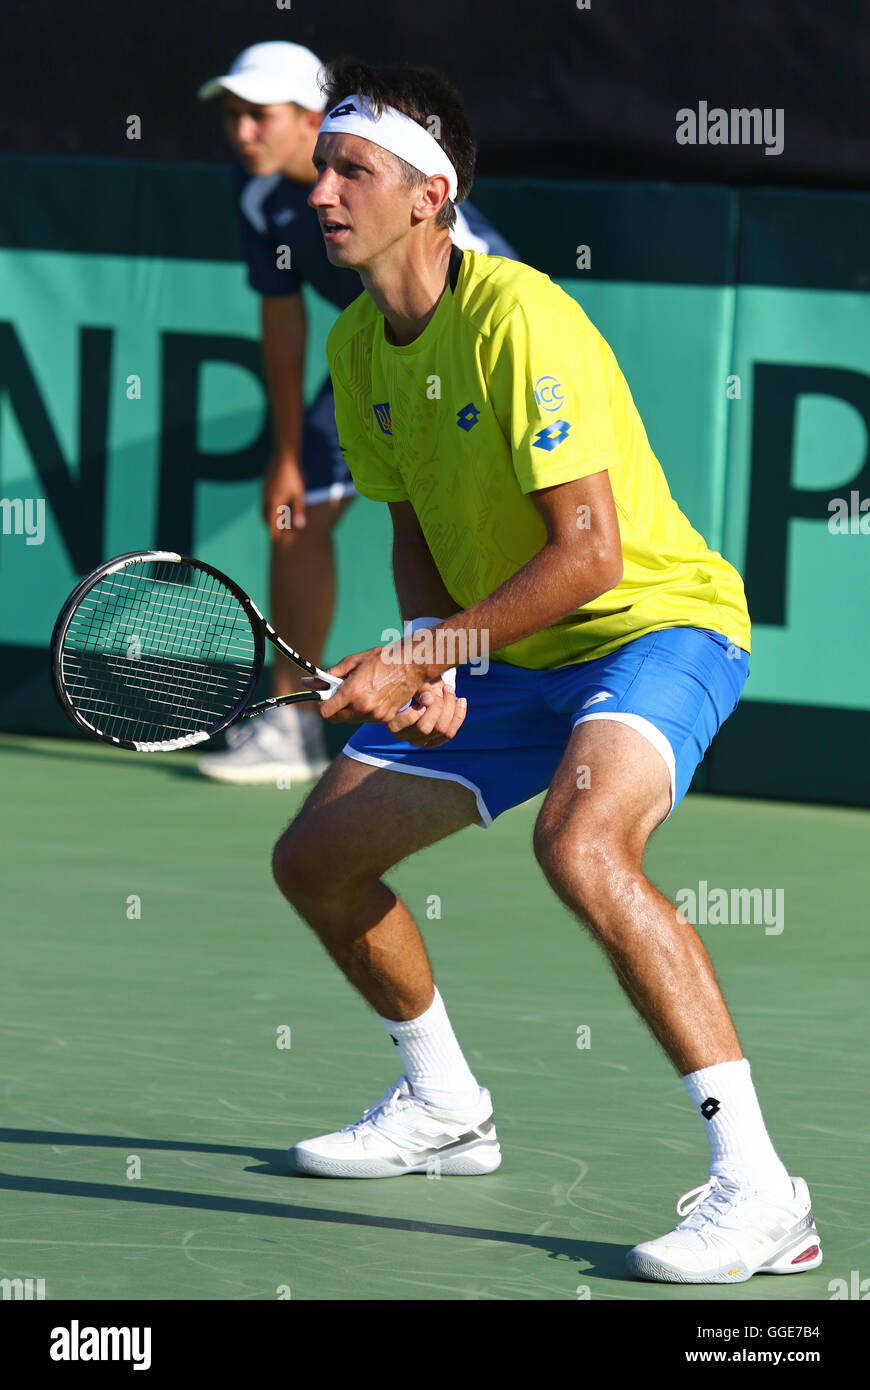 KYIV, UKRAINE - JULY 15, 2016: Sergiy STAKHOVSKY of Ukraine in action during BNP Paribas Davis Cup Europe/Africa Zone Group I game against Gerald MELZER of Austria at Campa Bucha Tennis Club in Kyiv Stock Photo